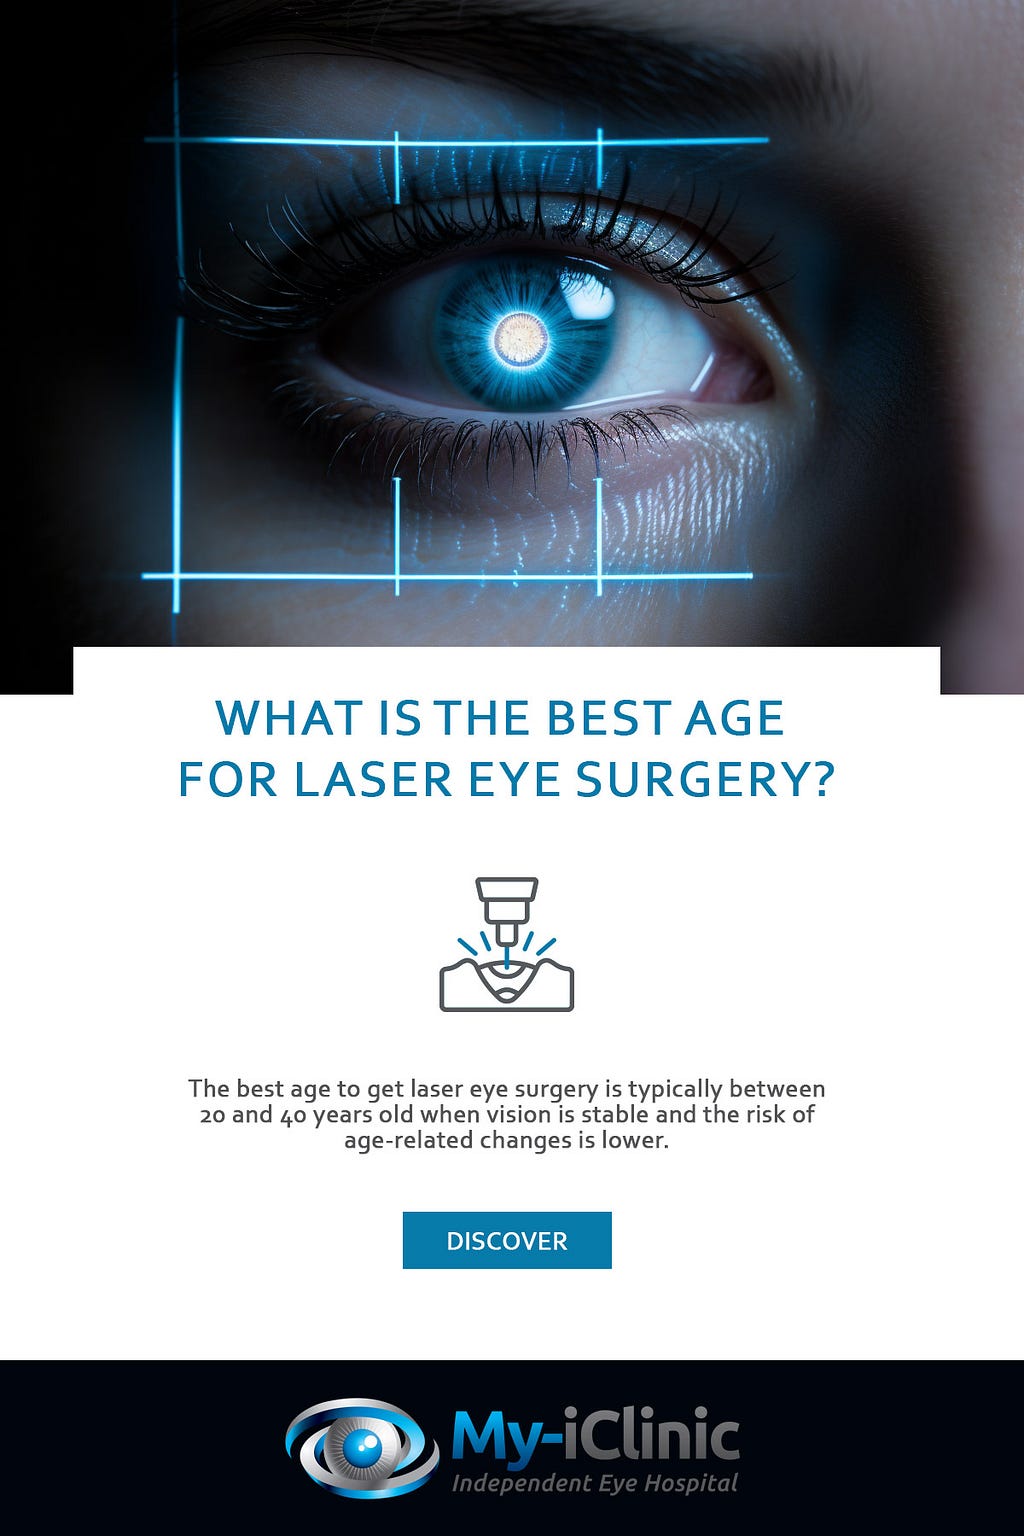 What is the best age for laser eye surgery?